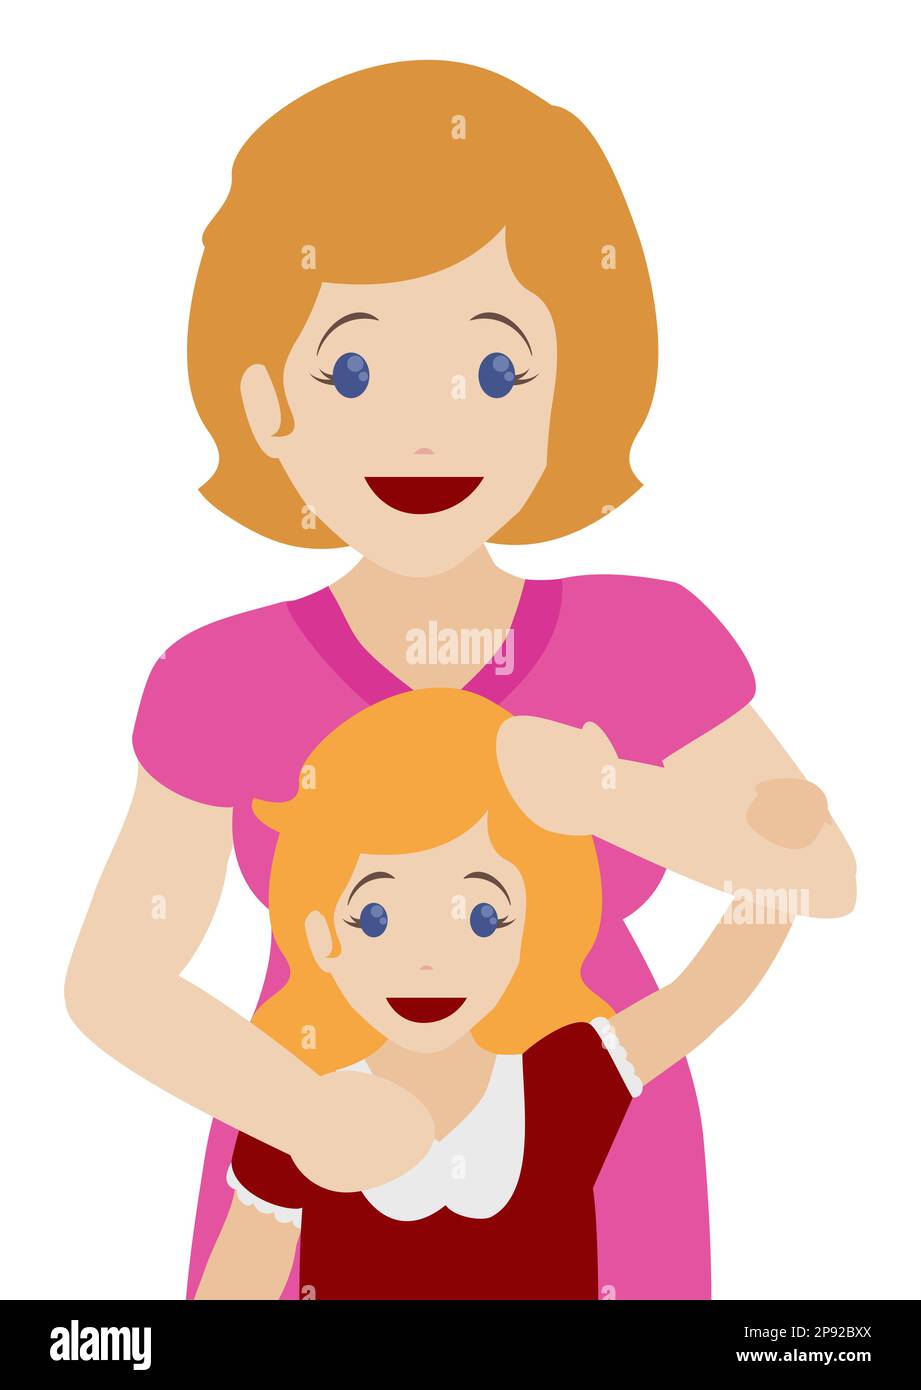 Cute hug scene with happy blonde mother and daughter. Portrait design ...